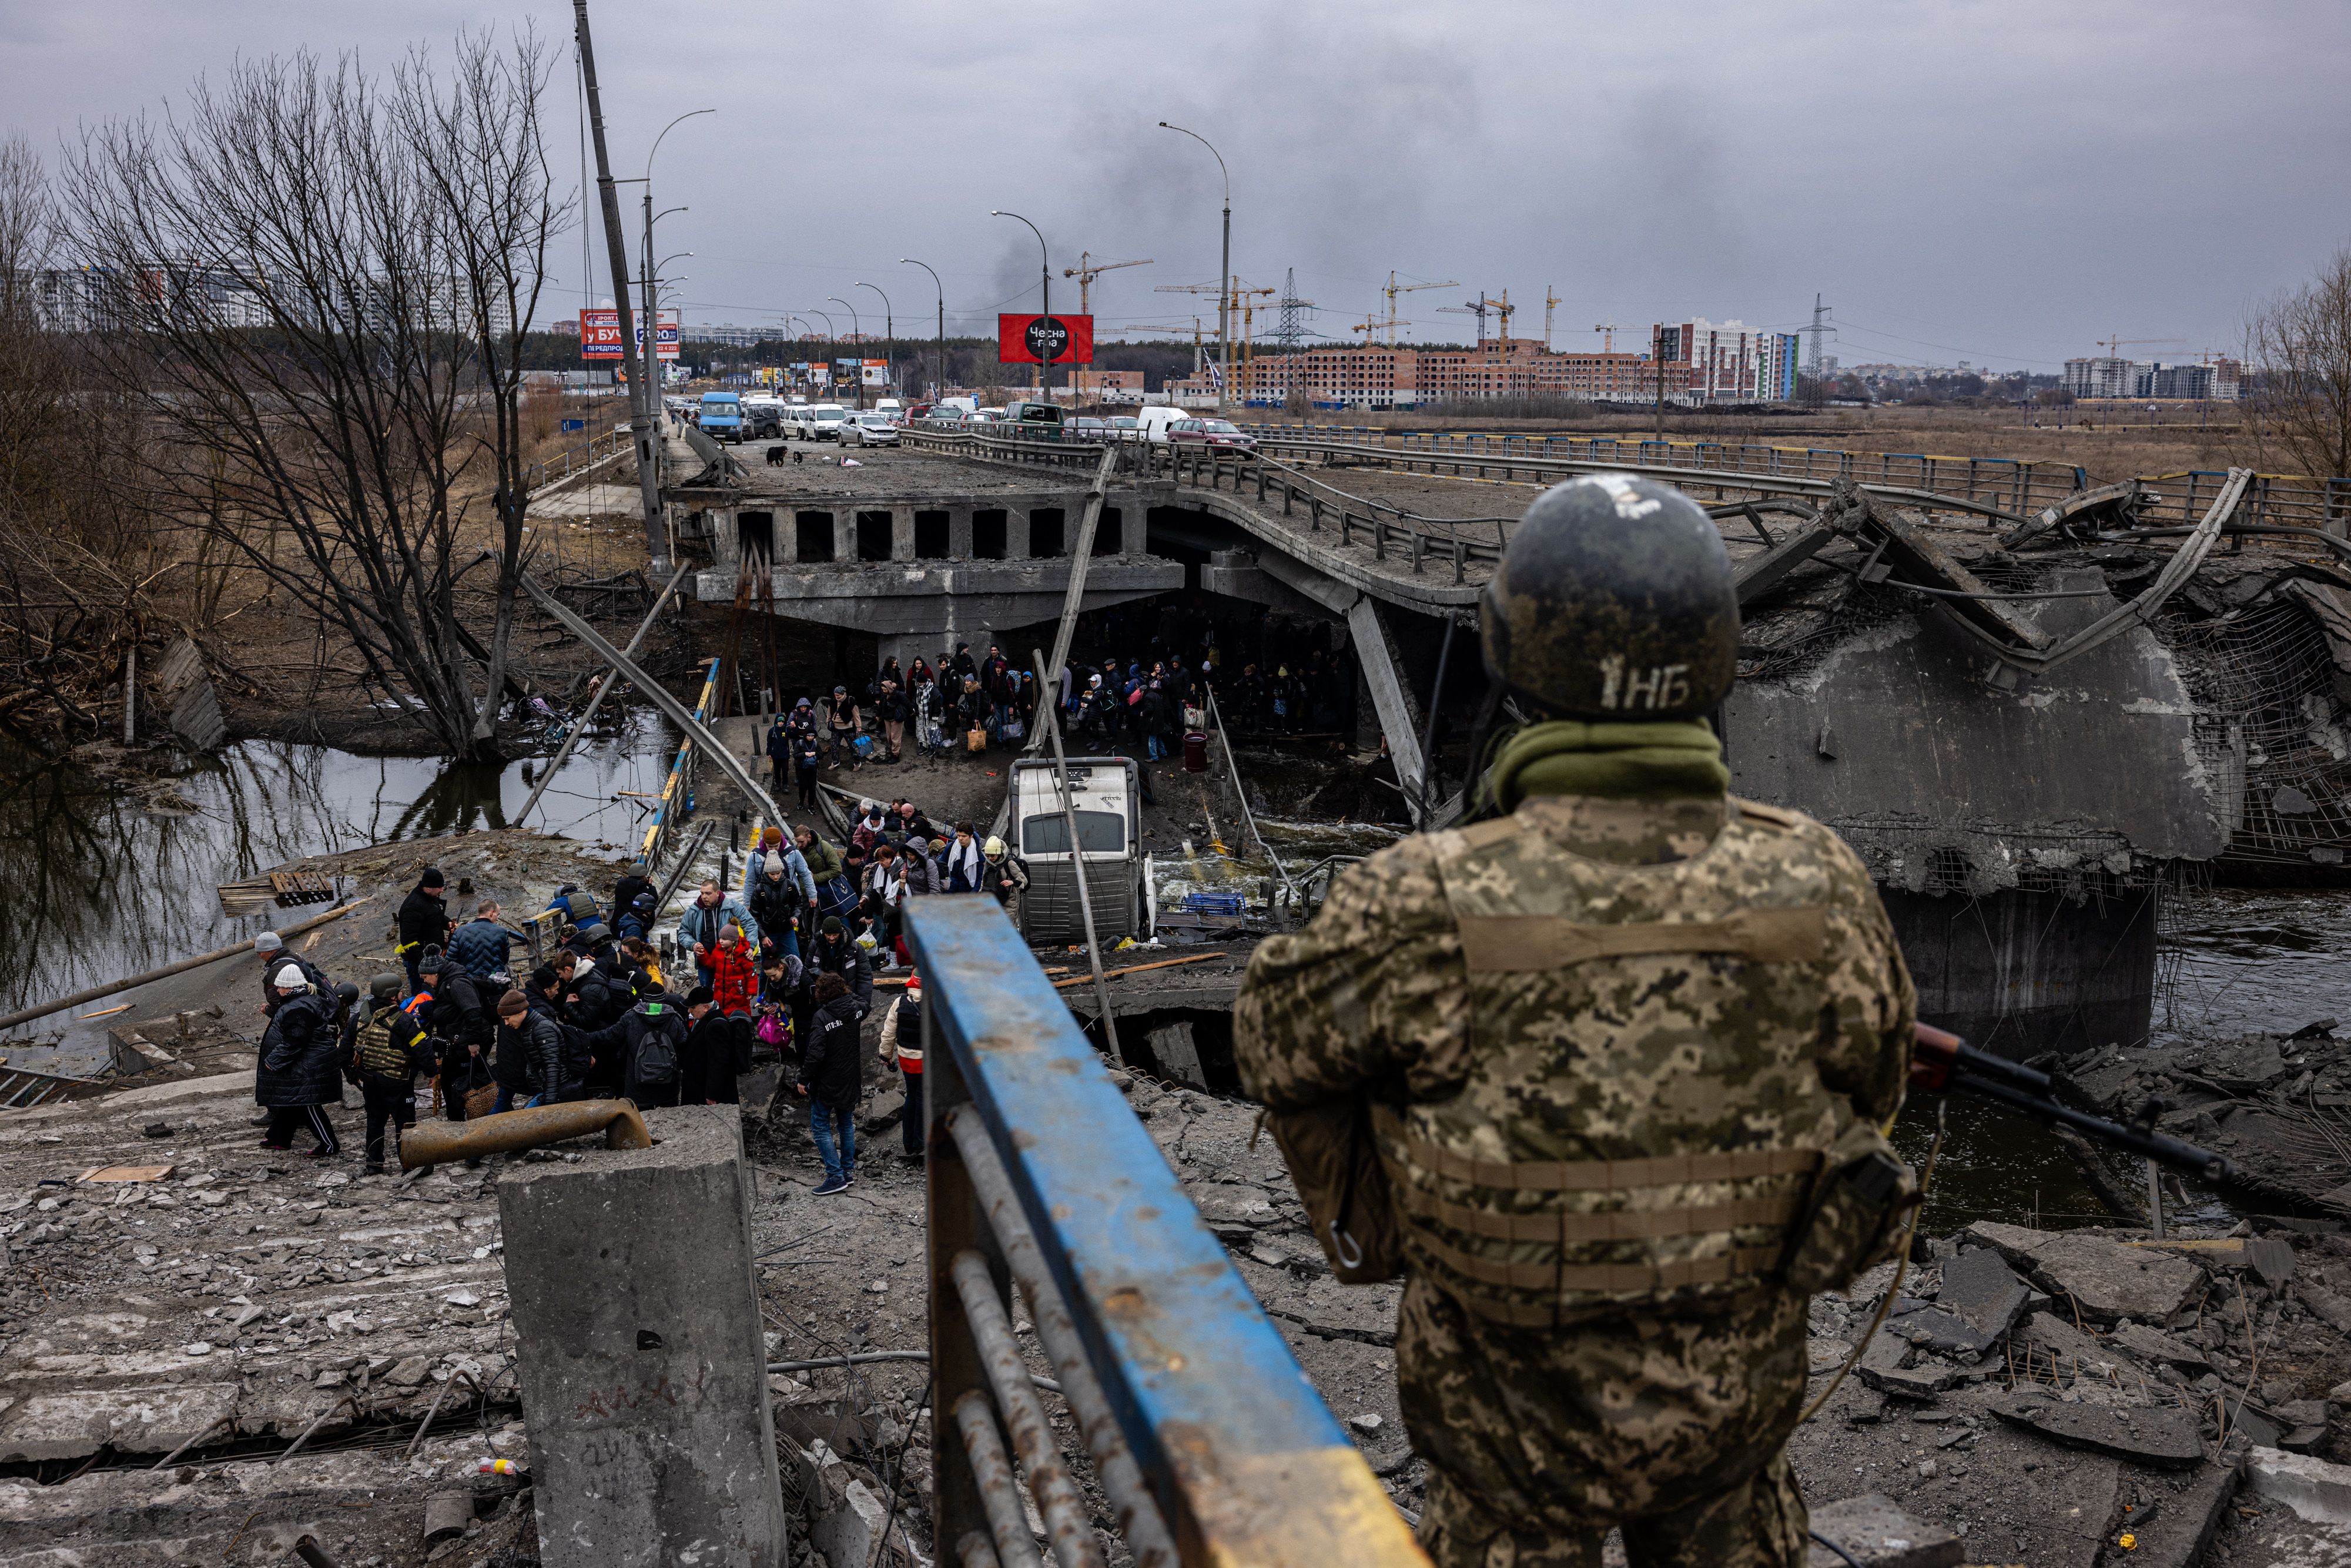 A Ukrainian serviceman looks on as evacuees cross a destroyed bridge as they flee the city of Irpin, Ukraine, on March 7.